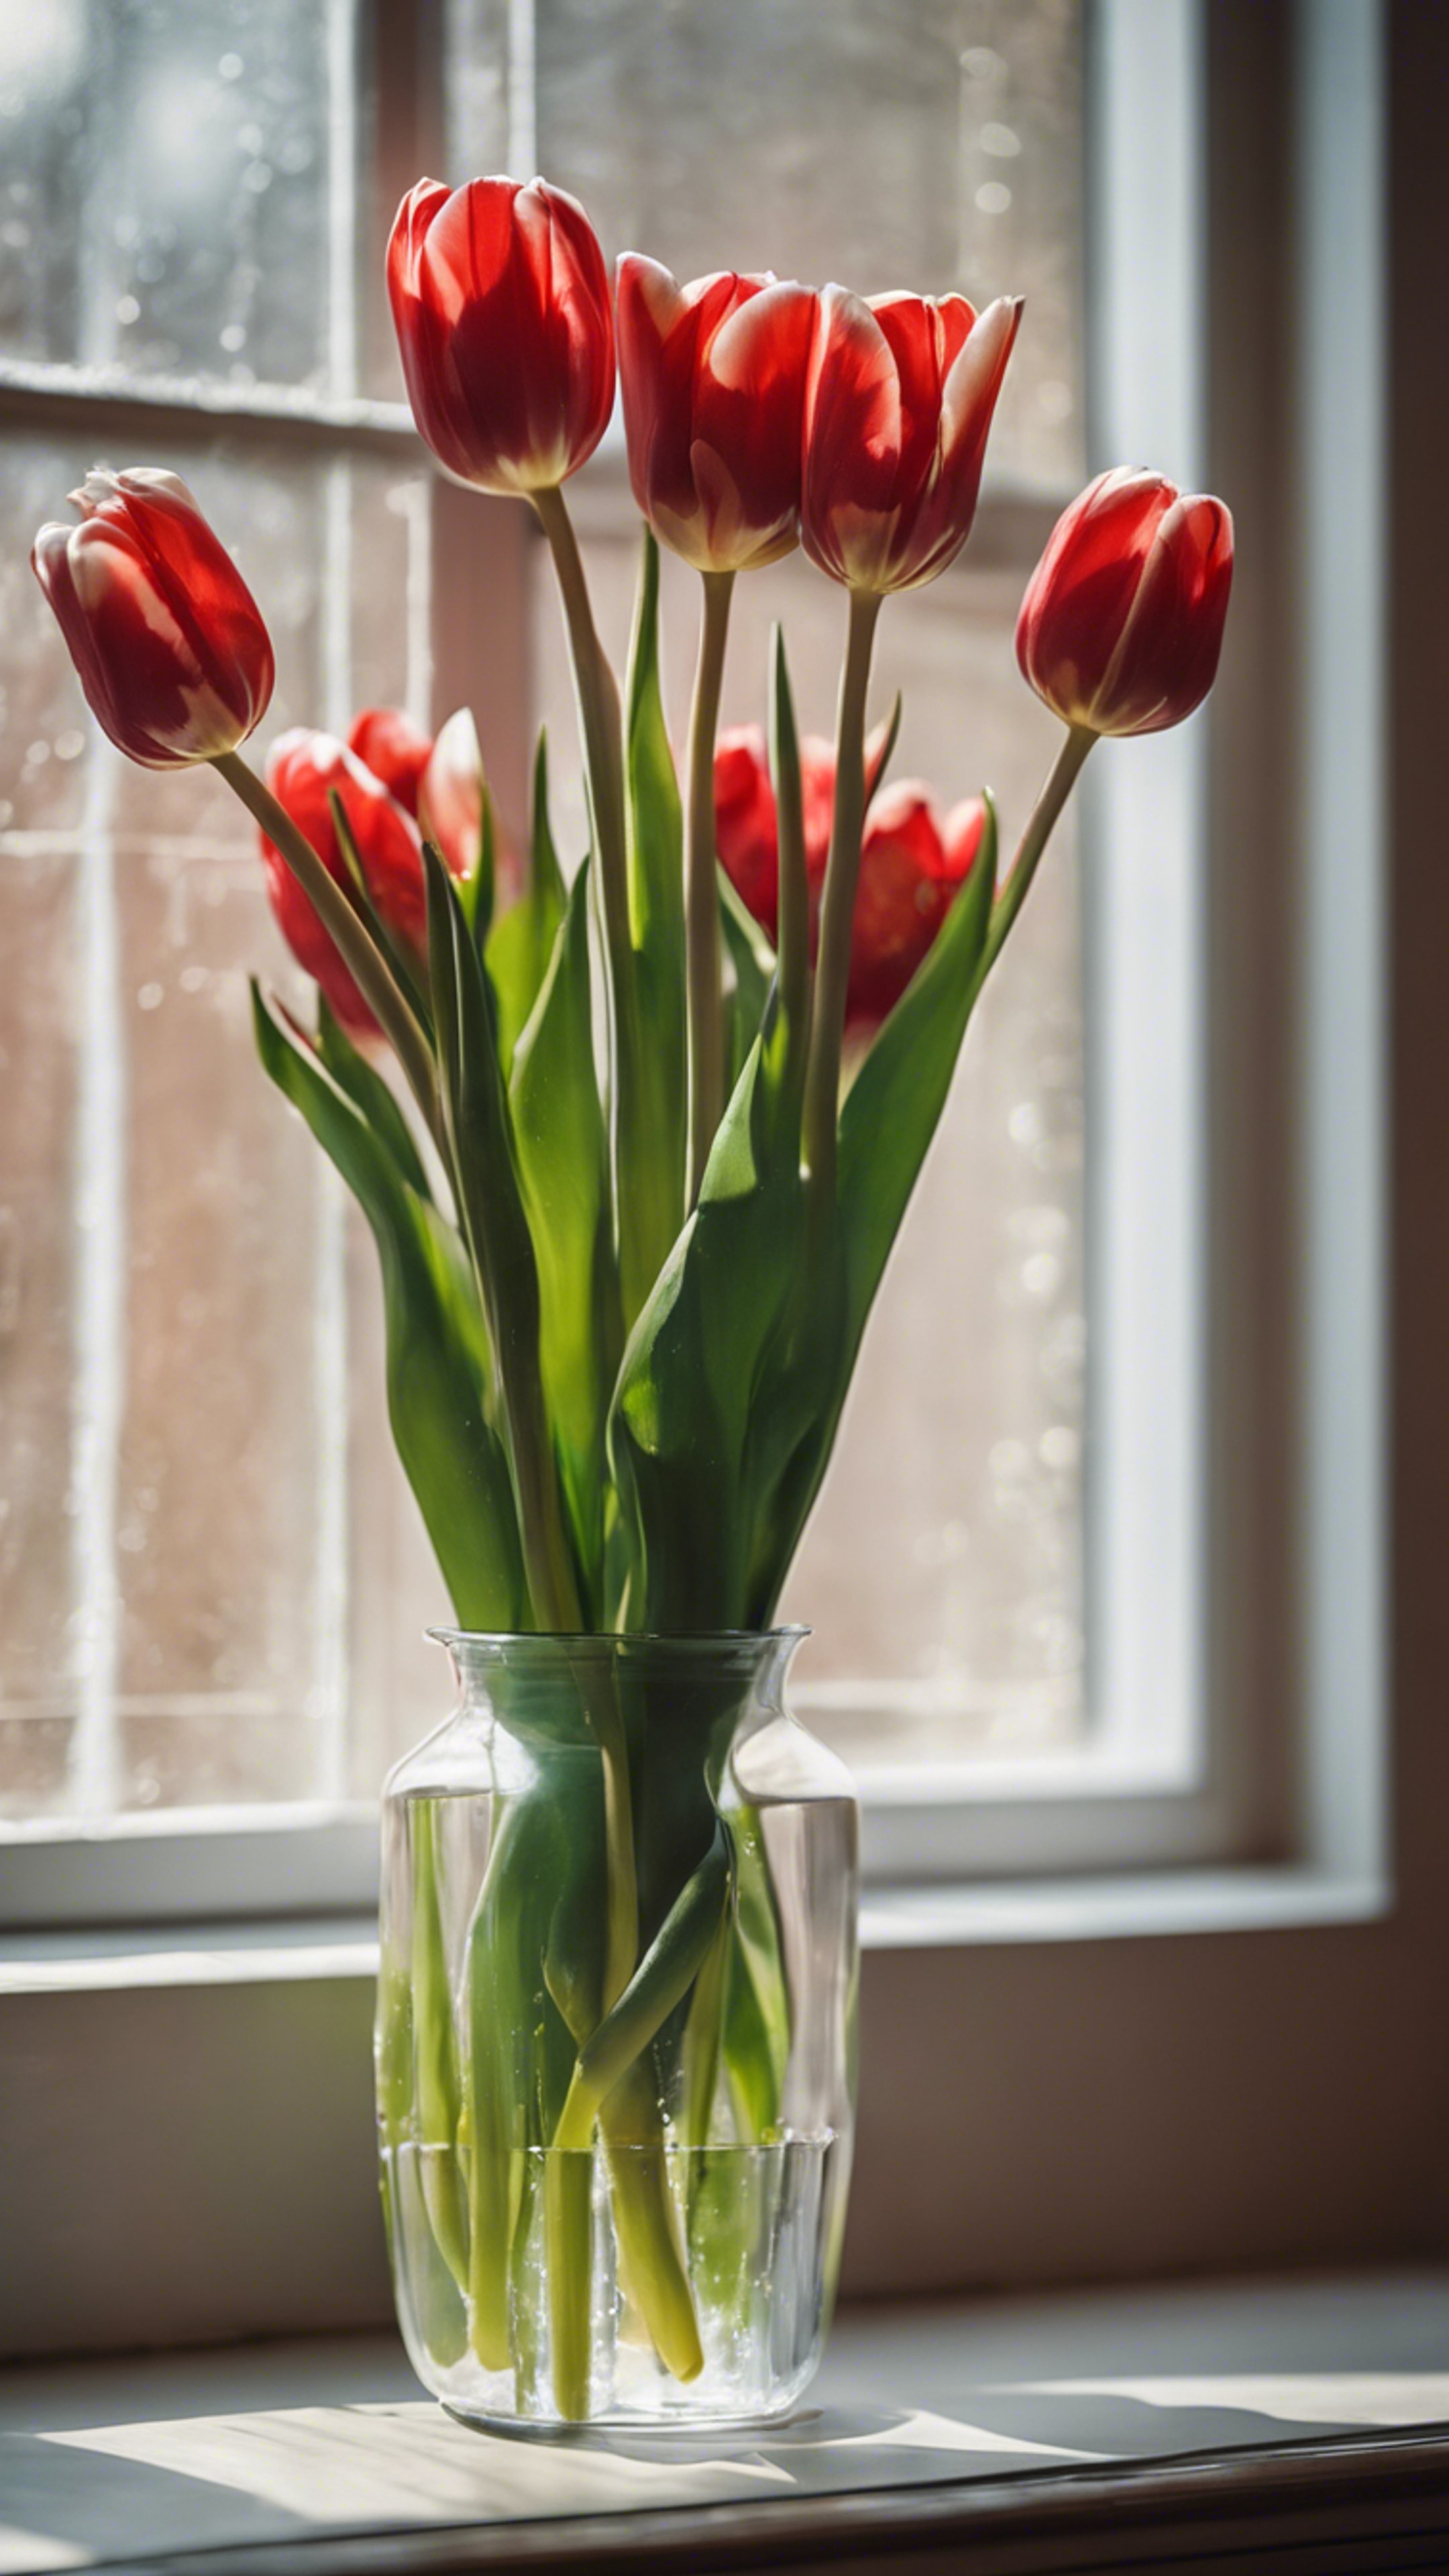 A bunch of vivid red and white tulips in a glass vase, lit by natural light. Sfondo[fc69acd6917c413b913f]